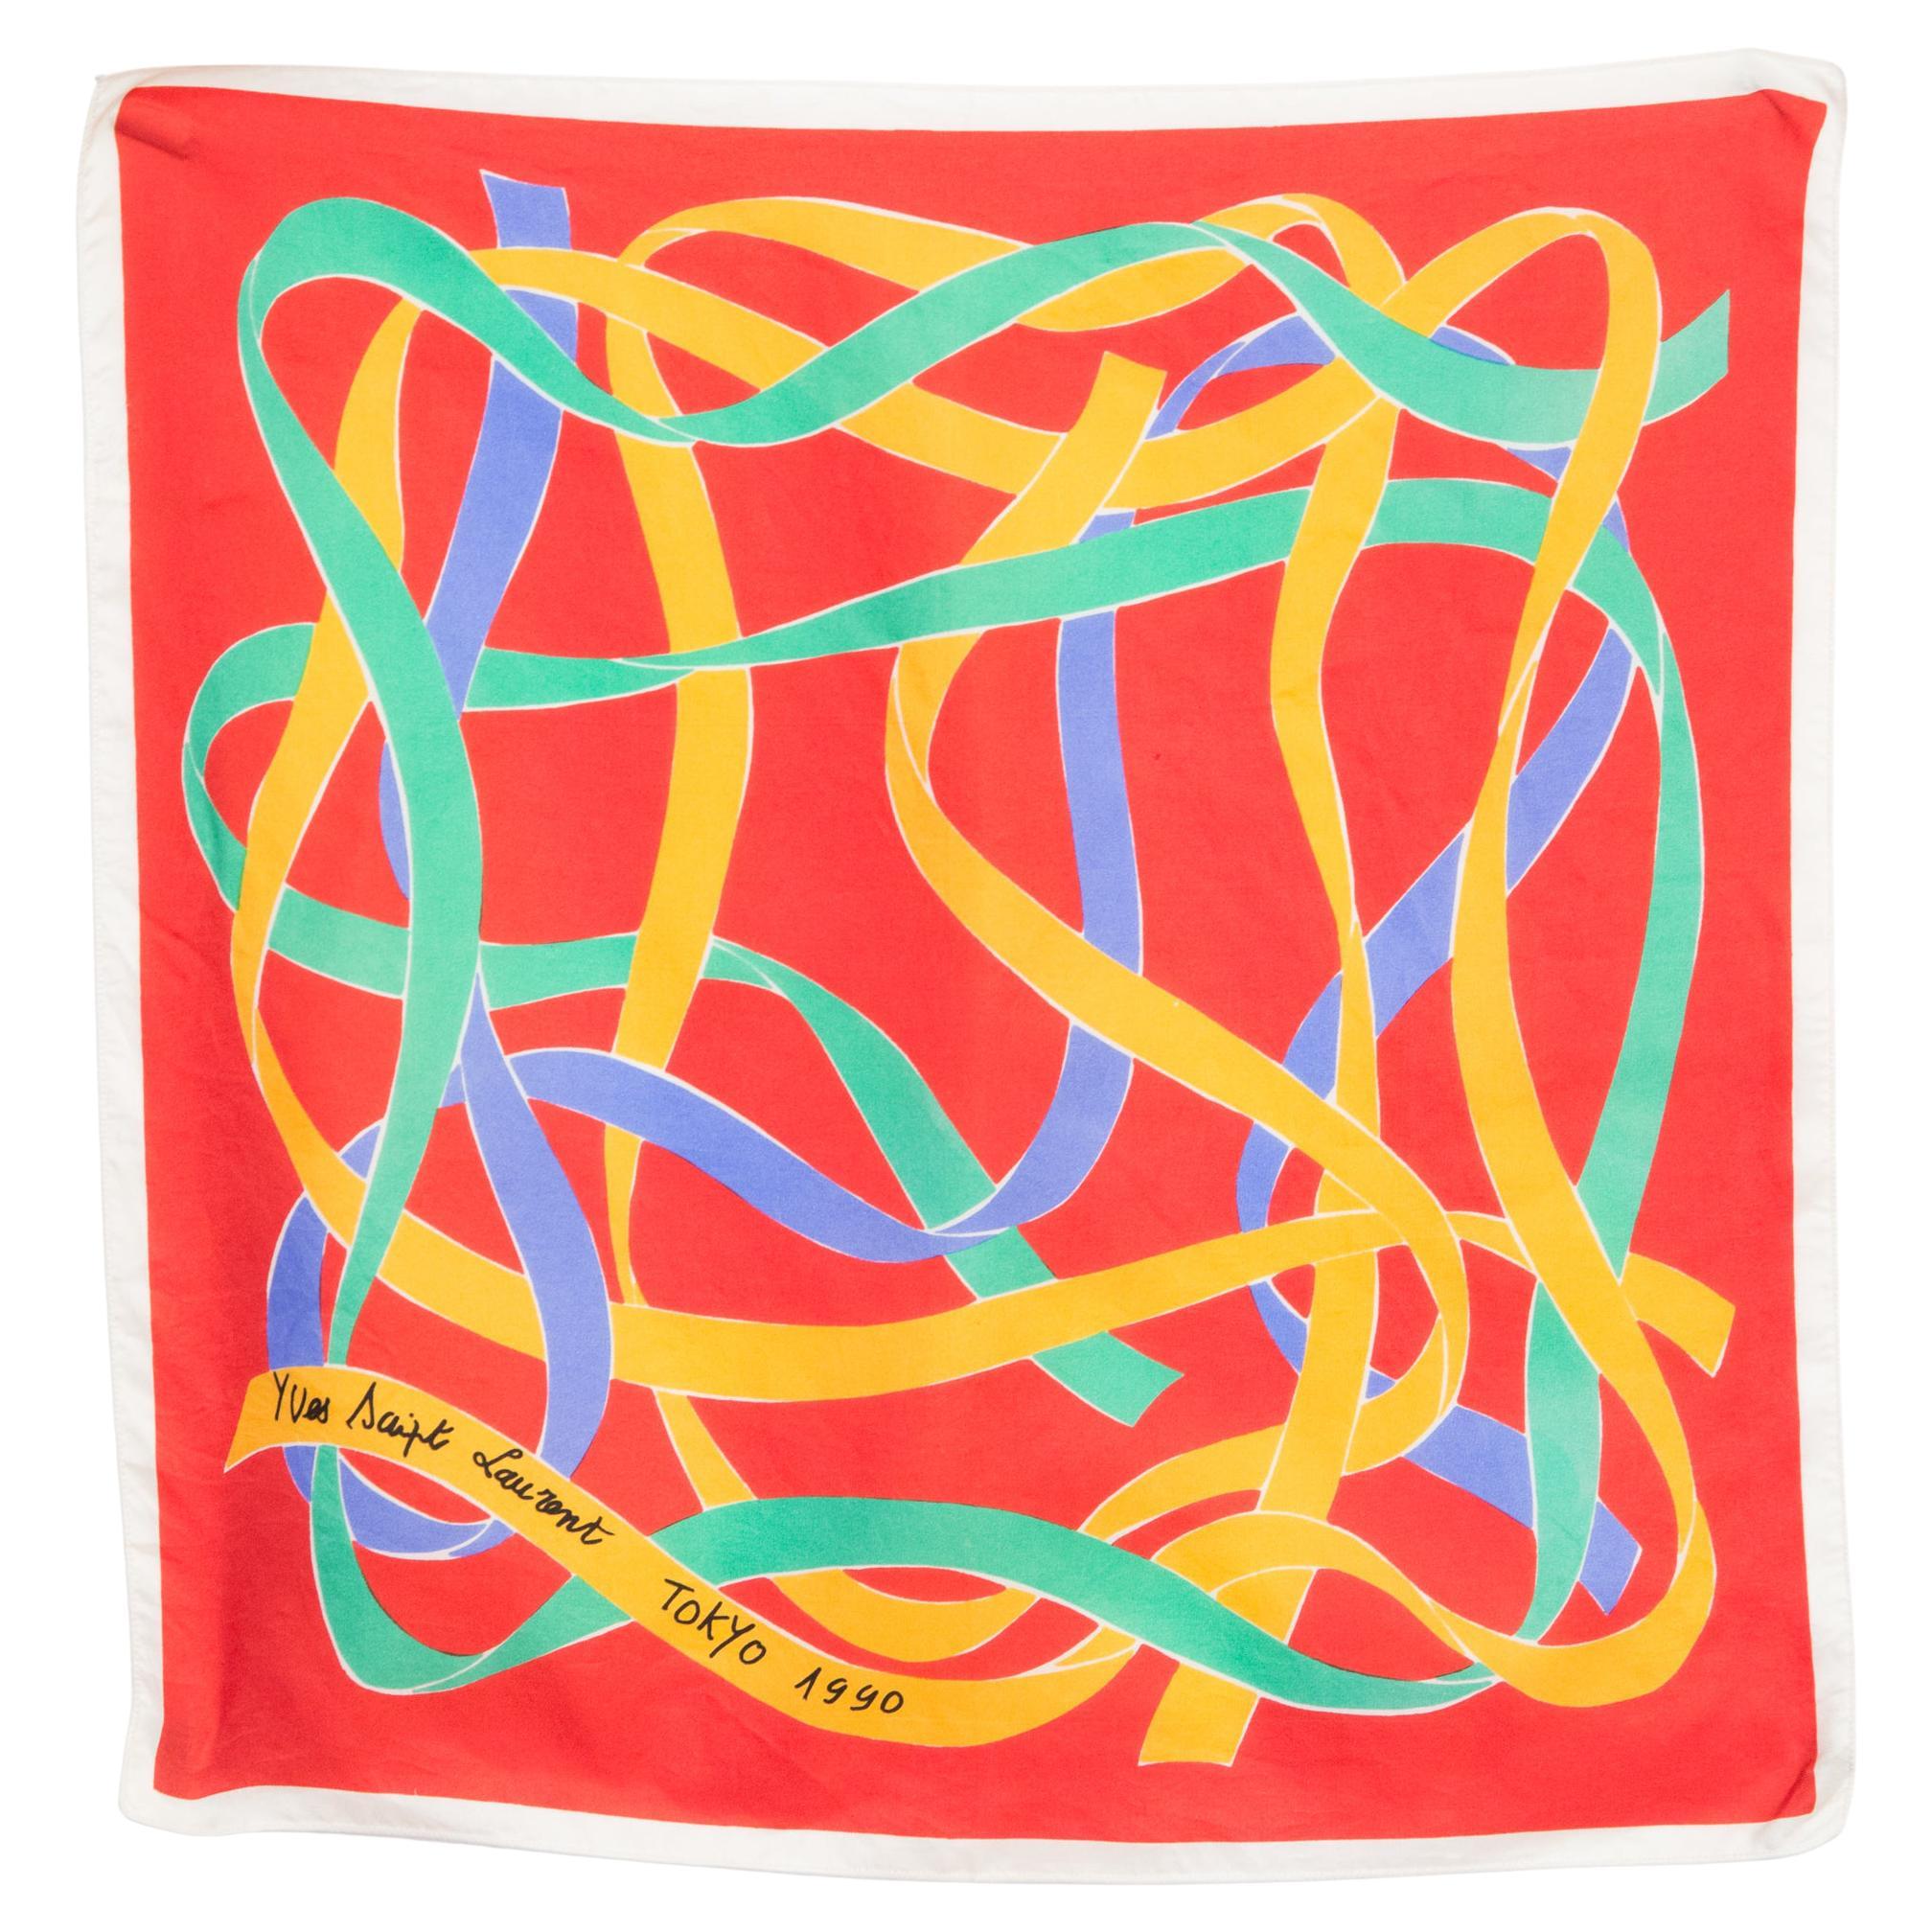  Yves Saint Laurent YSL Red Ribbons Tokyo 1990 Silk Scarf For Sale